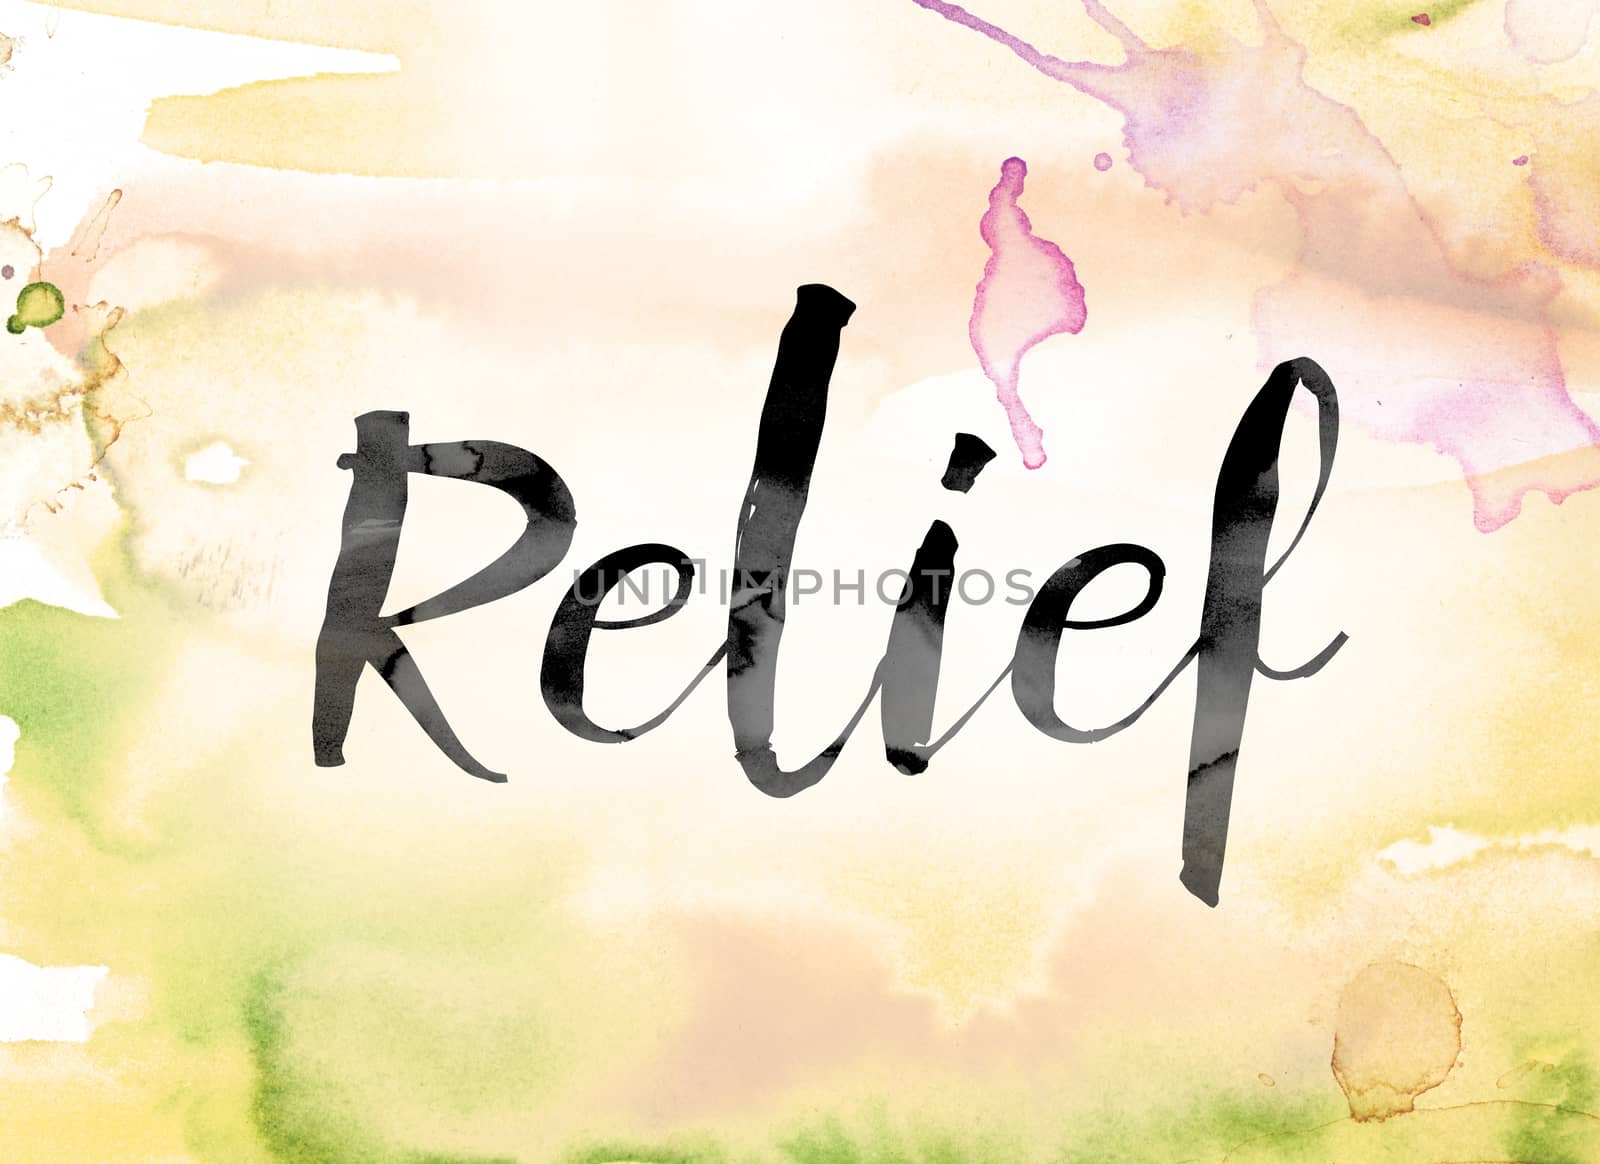 The word "Relief" painted in black ink over a colorful watercolor washed background concept and theme.